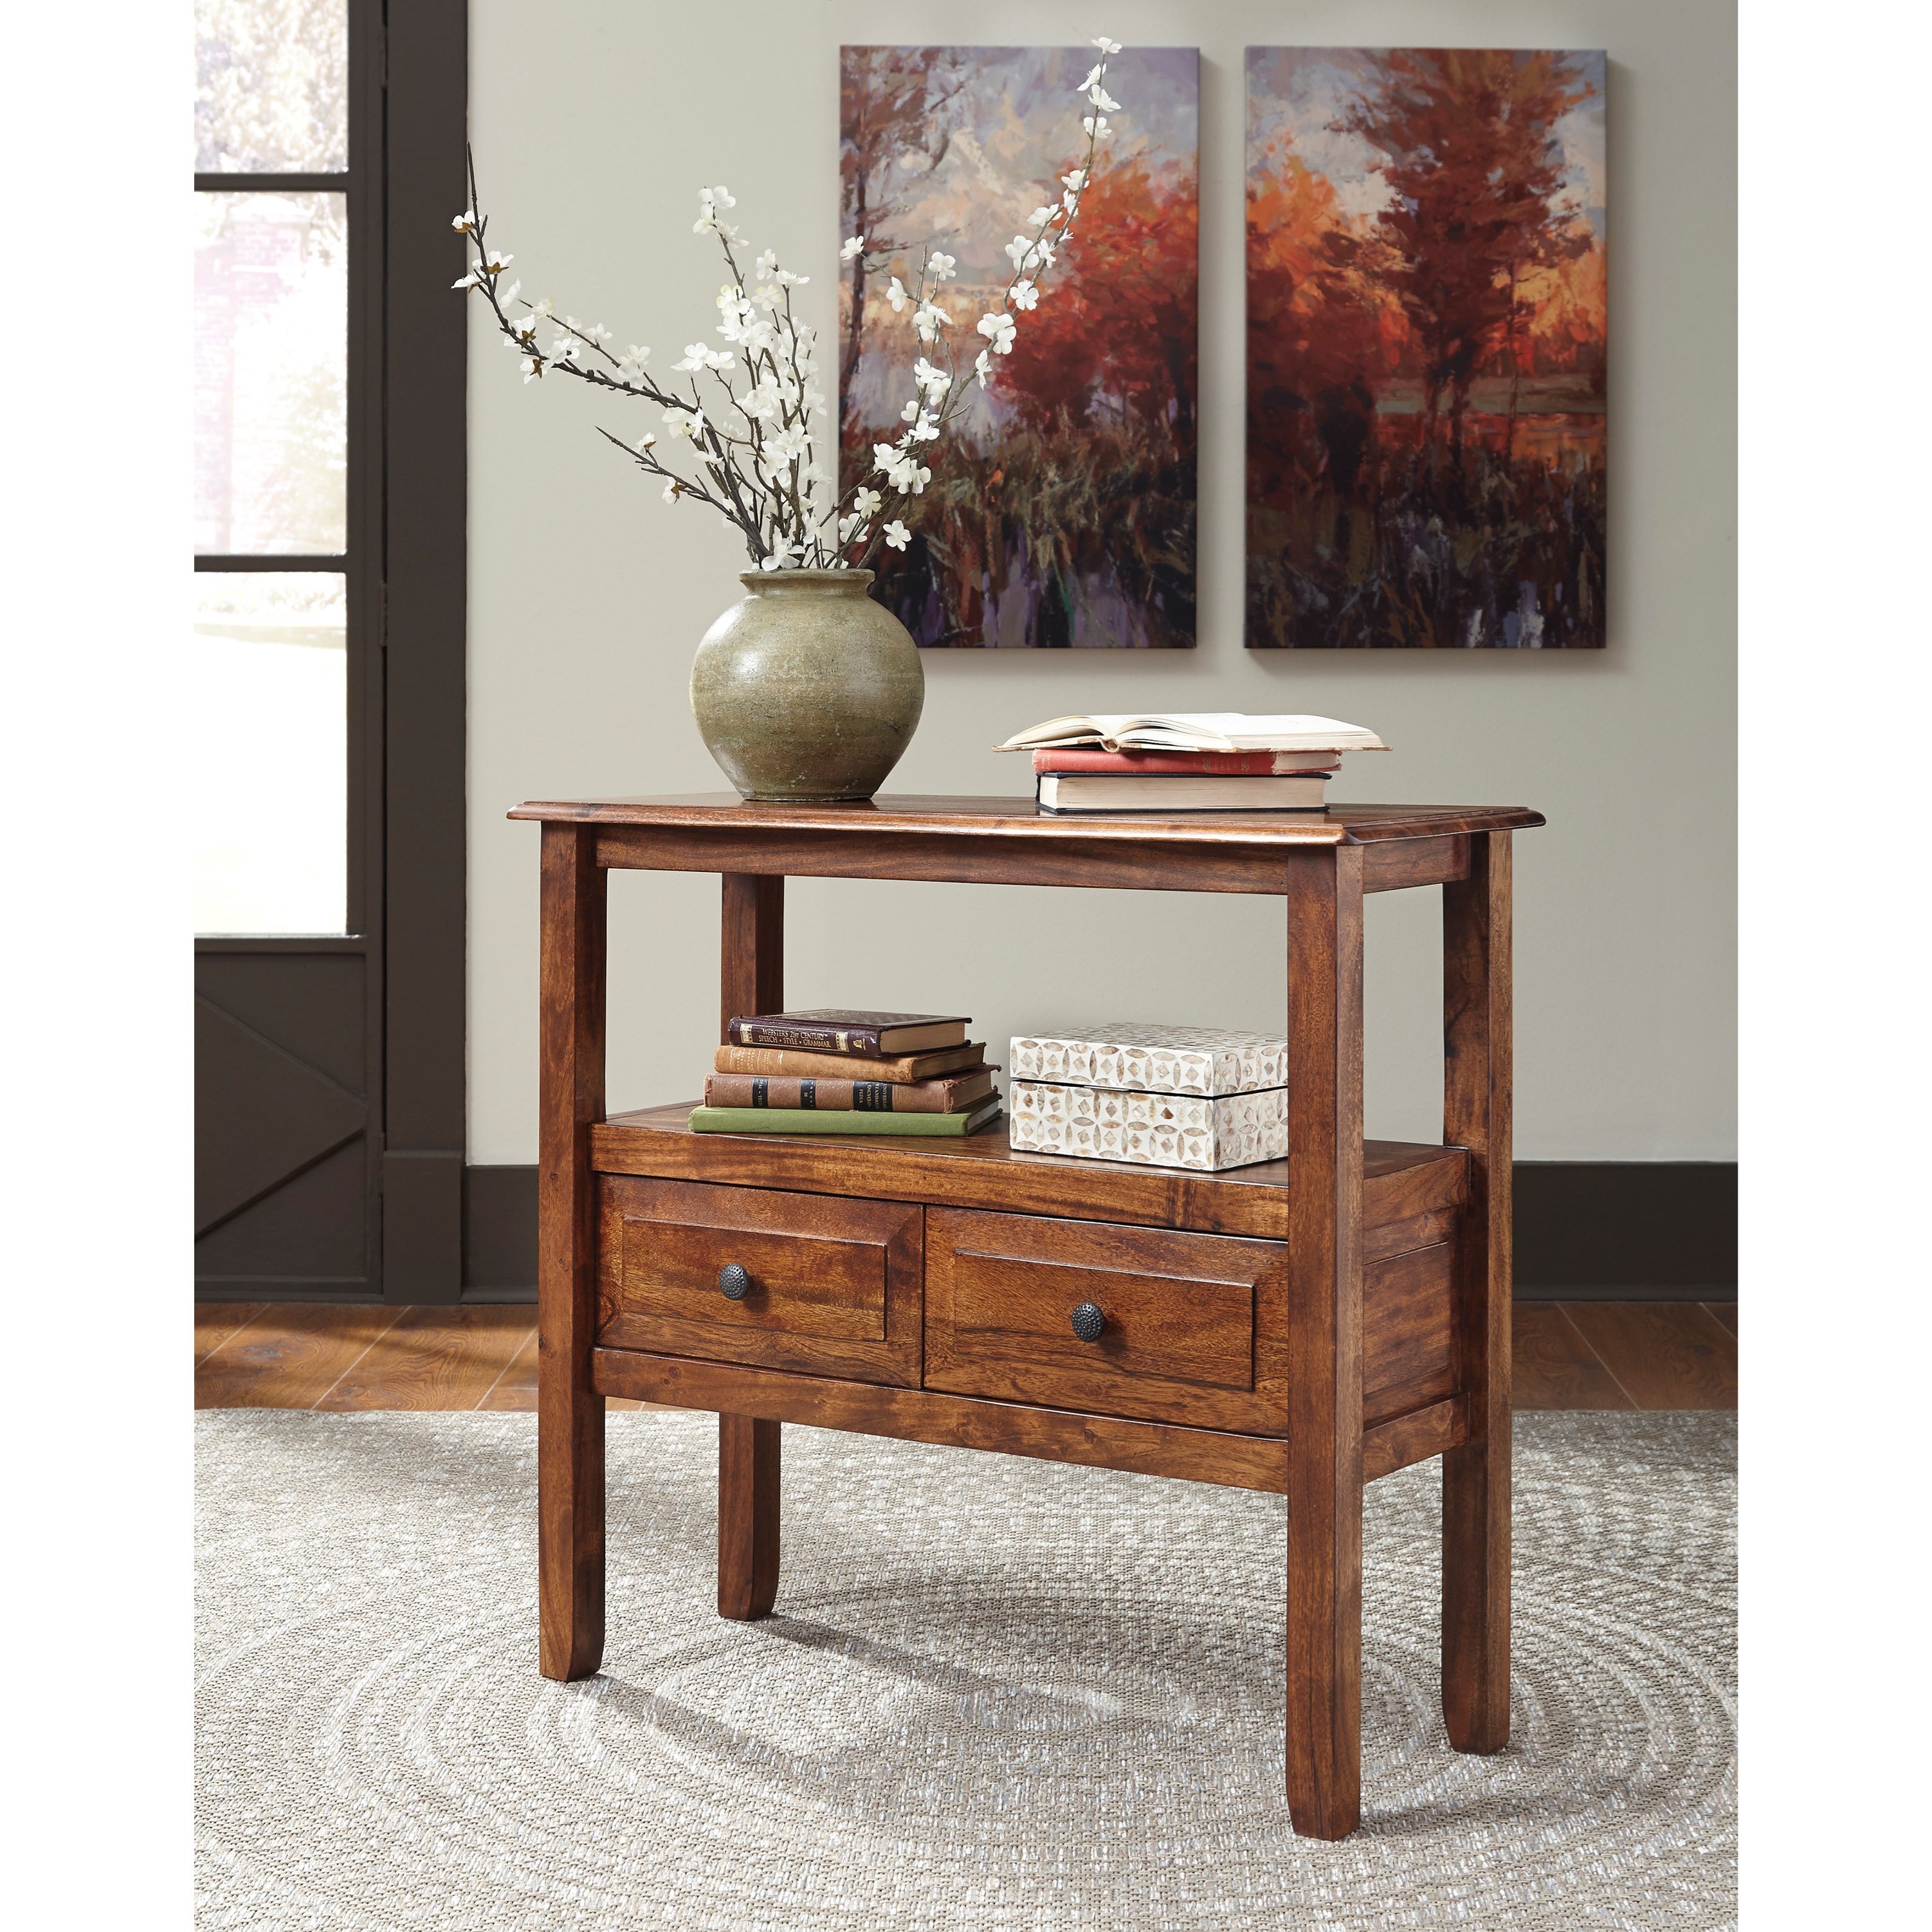 acacia solid wood accent table signature design ashley wolf products color abbonto tables small wine rack black round dining cordless battery operated lamps side wicker narrow end